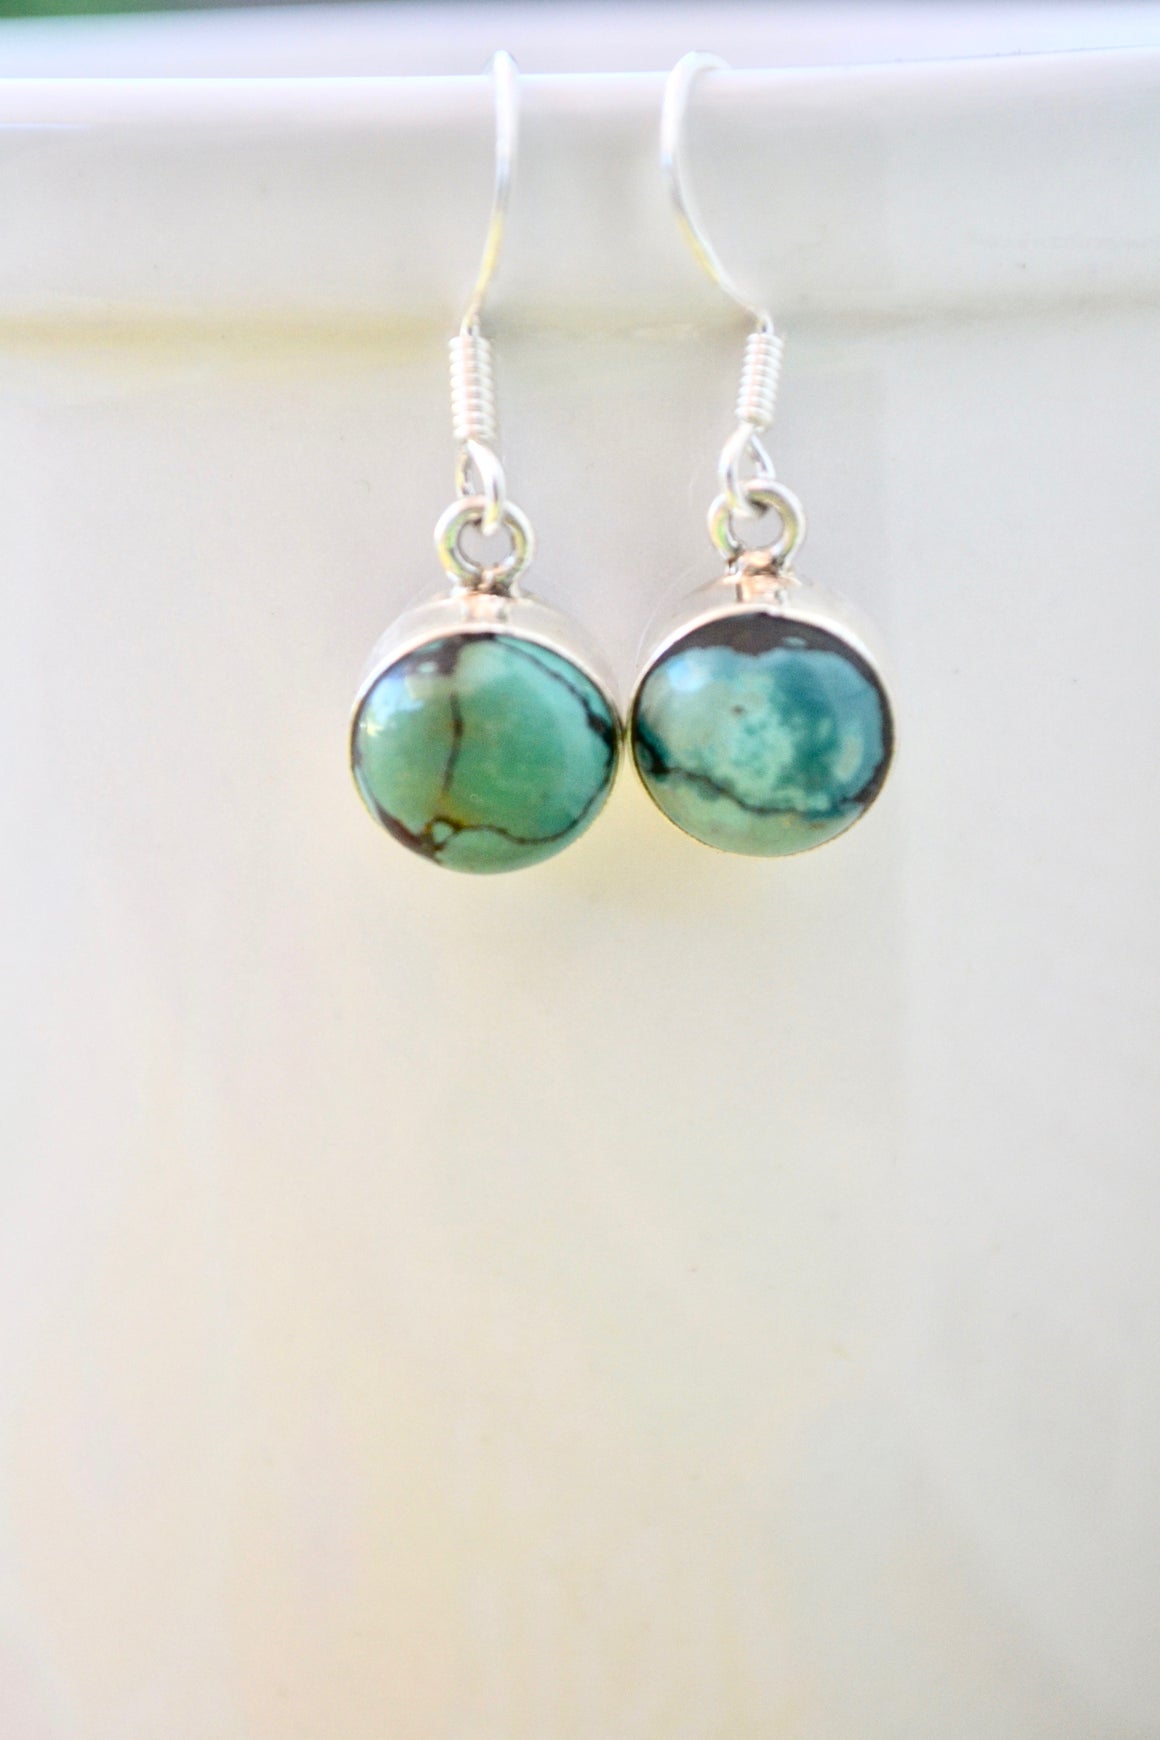 Round Turquoise Earrings in Sterling Silver